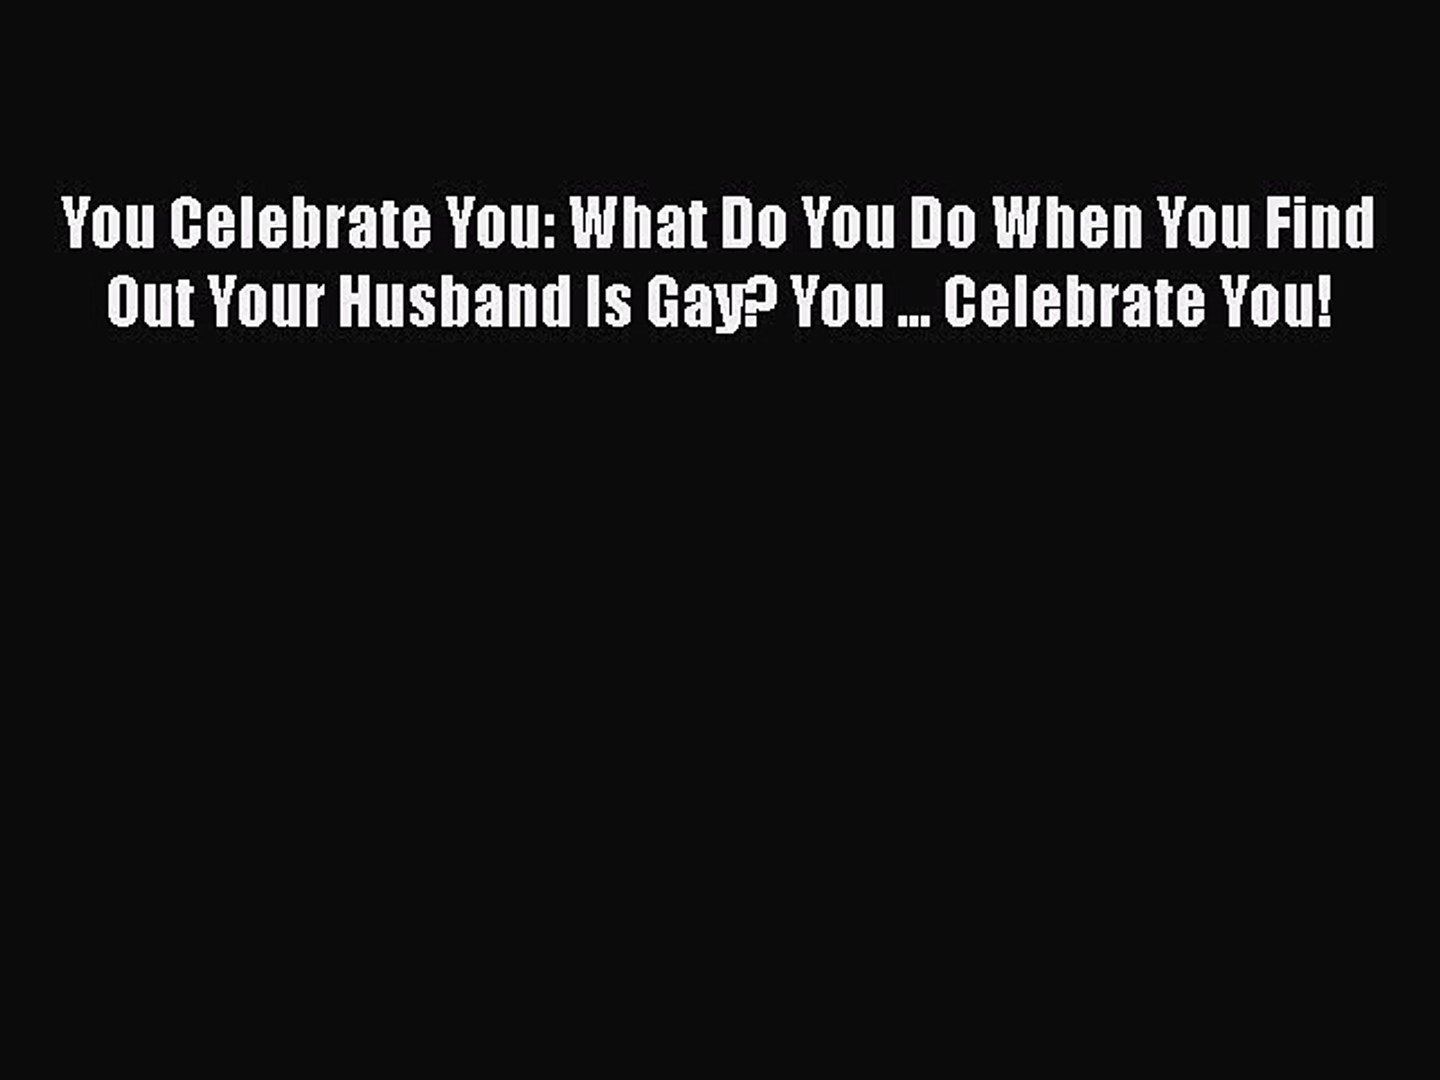 PDF You Celebrate You: What Do You Do When You Find Out Your Husband Is Gay? You ... Celebrate